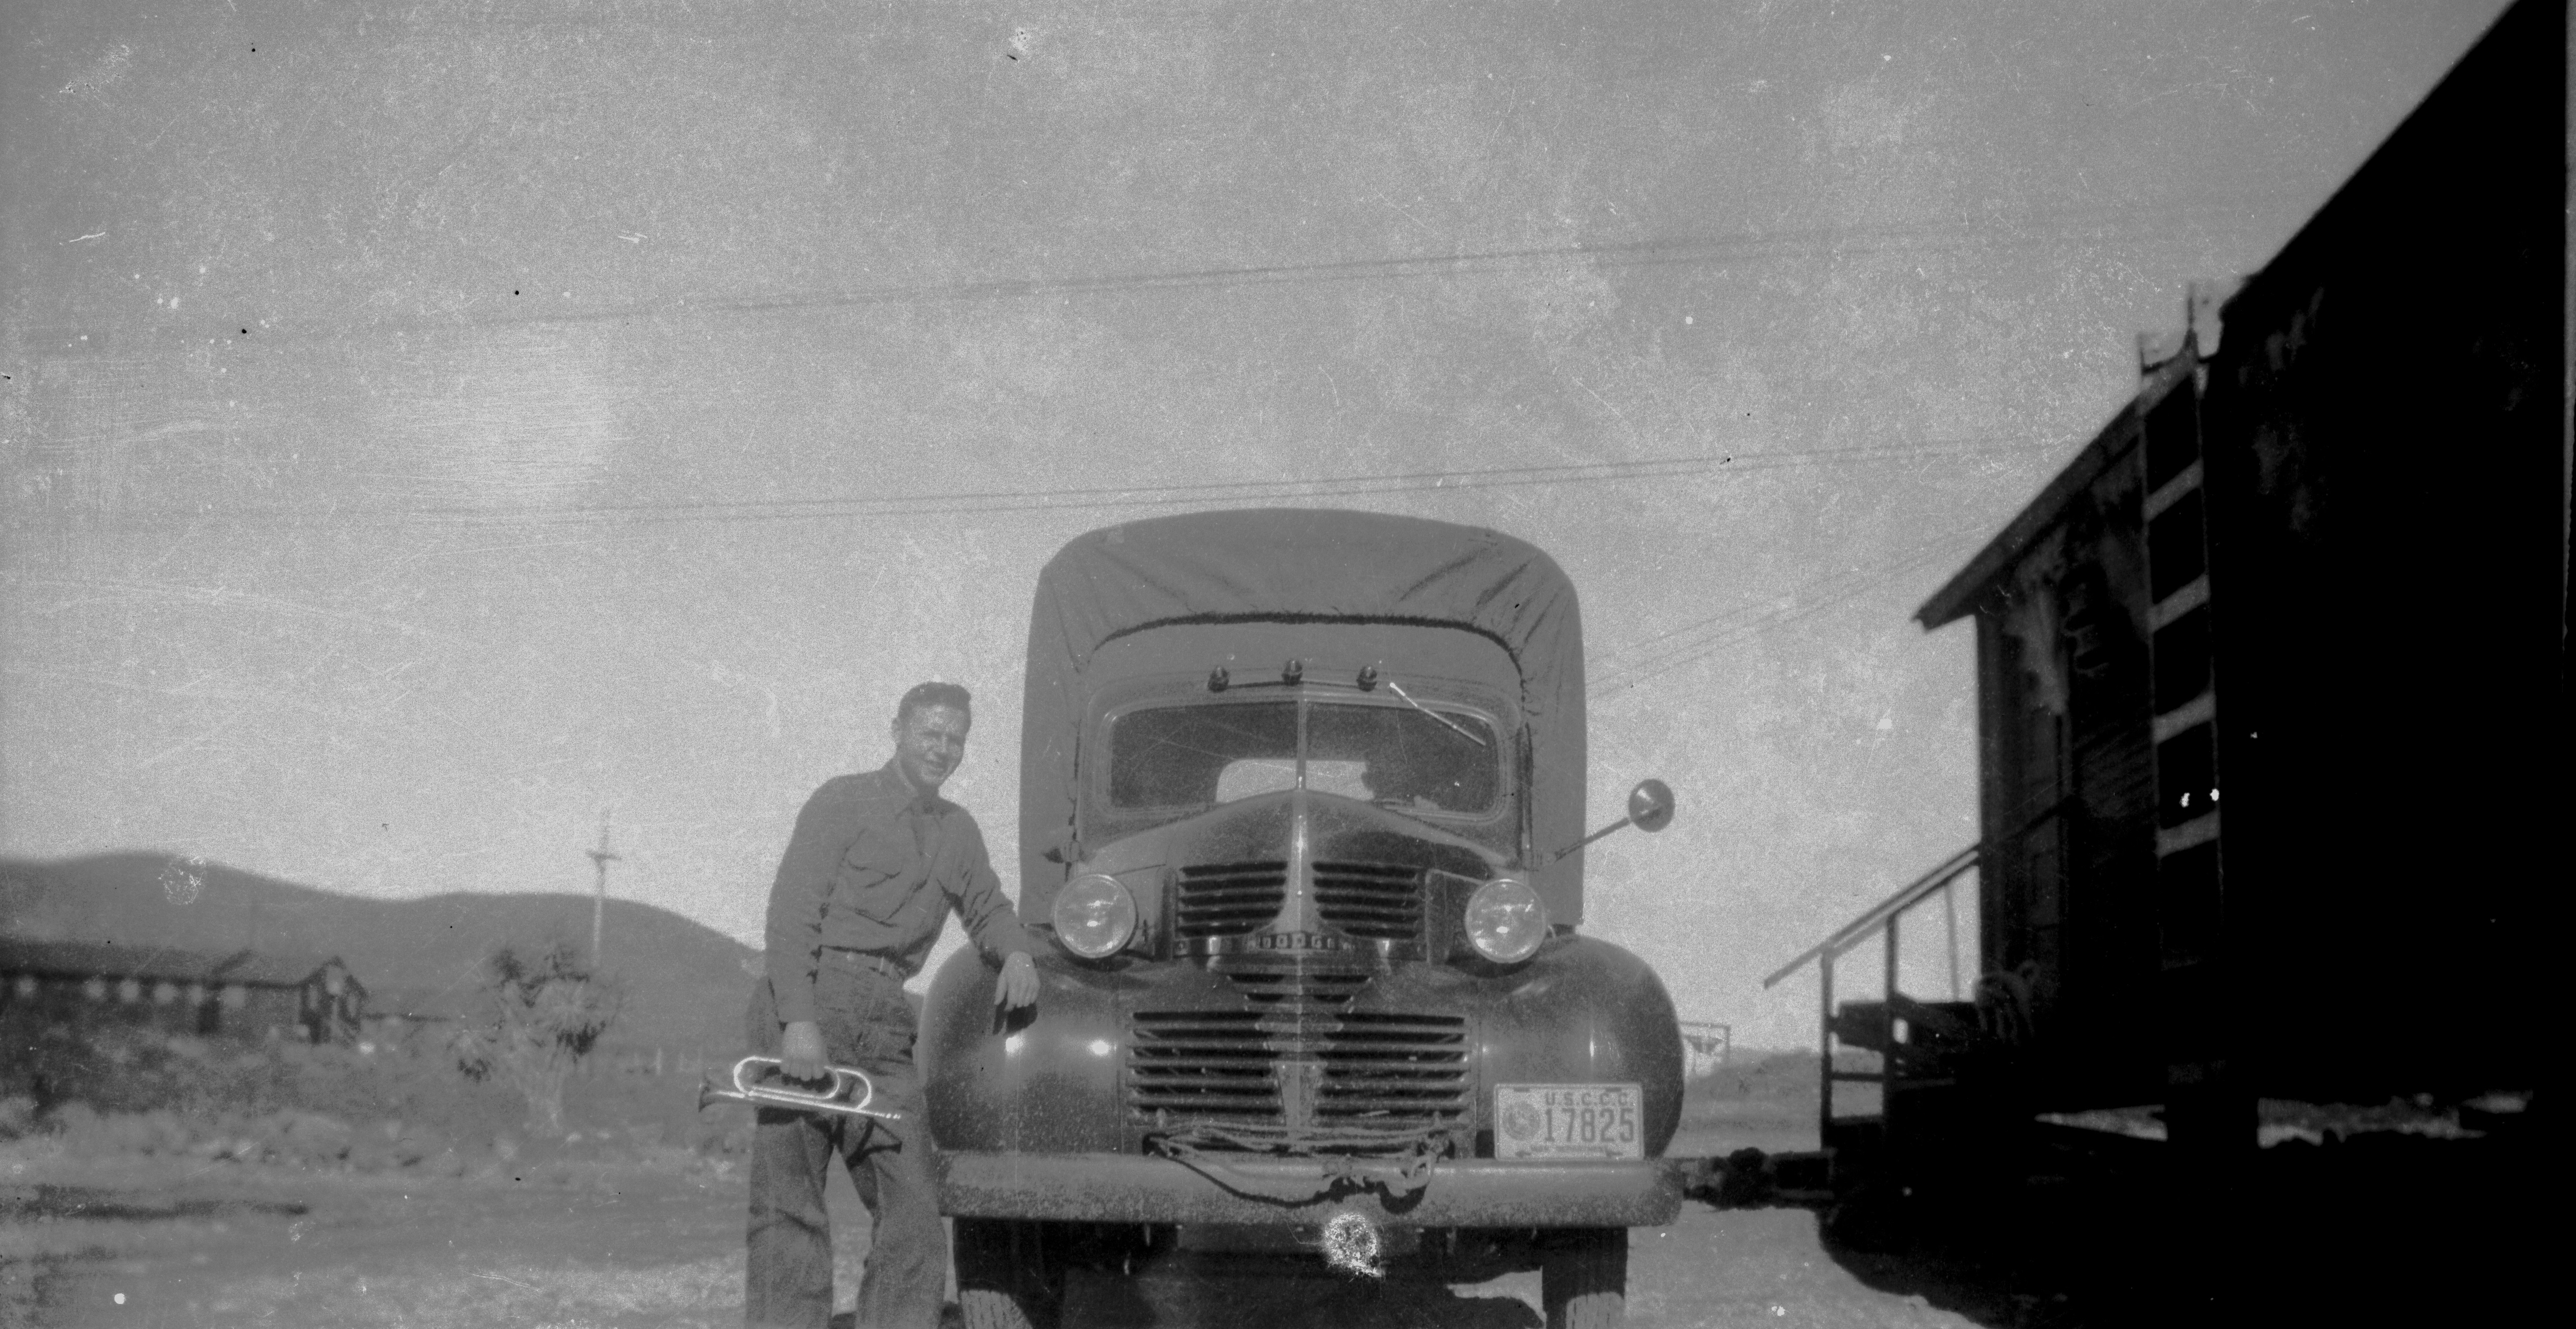 A CCC camp truck and an enrollee with a bugle